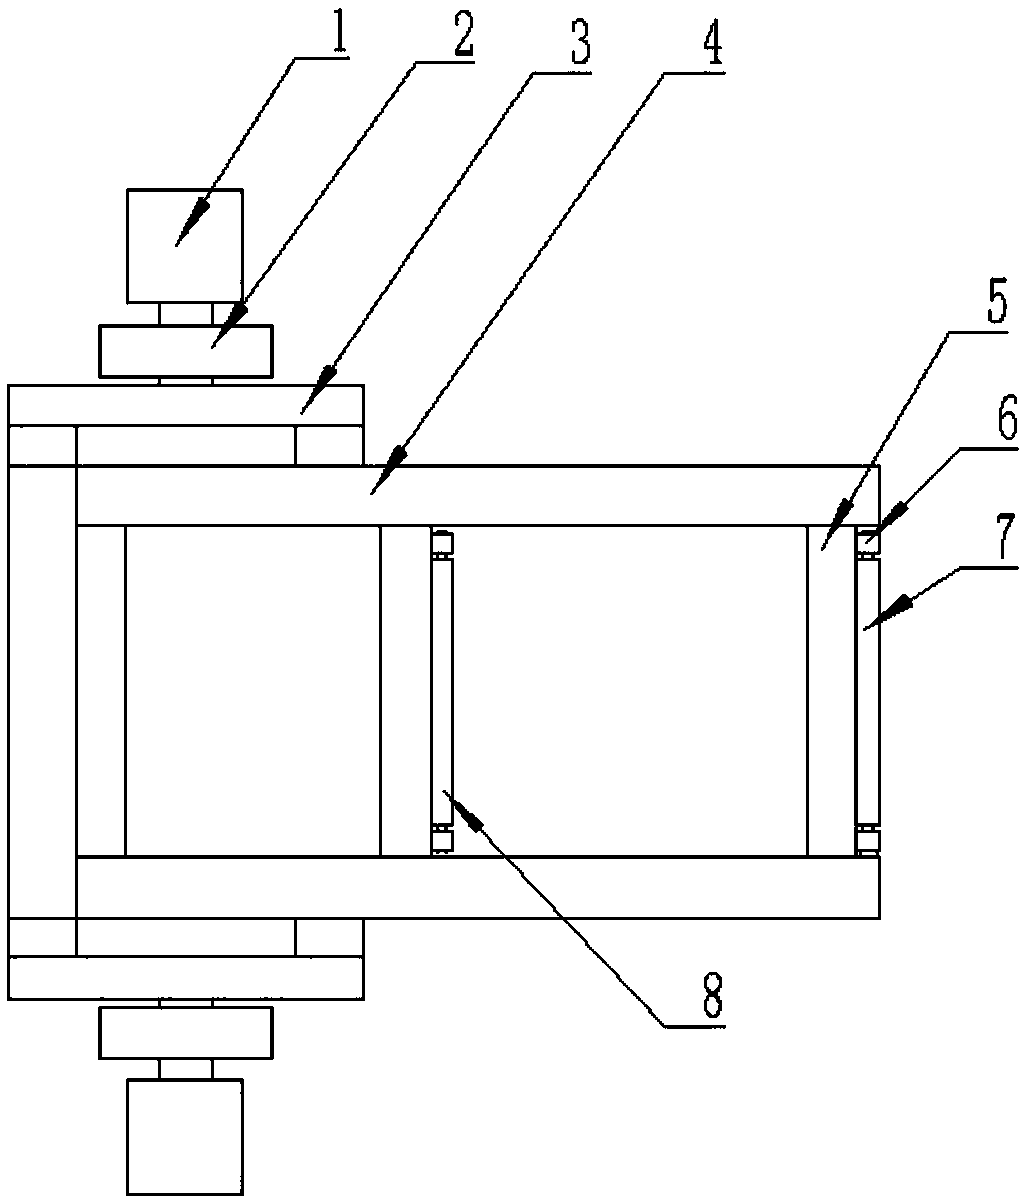 Board pushing system of multi-layer hot press